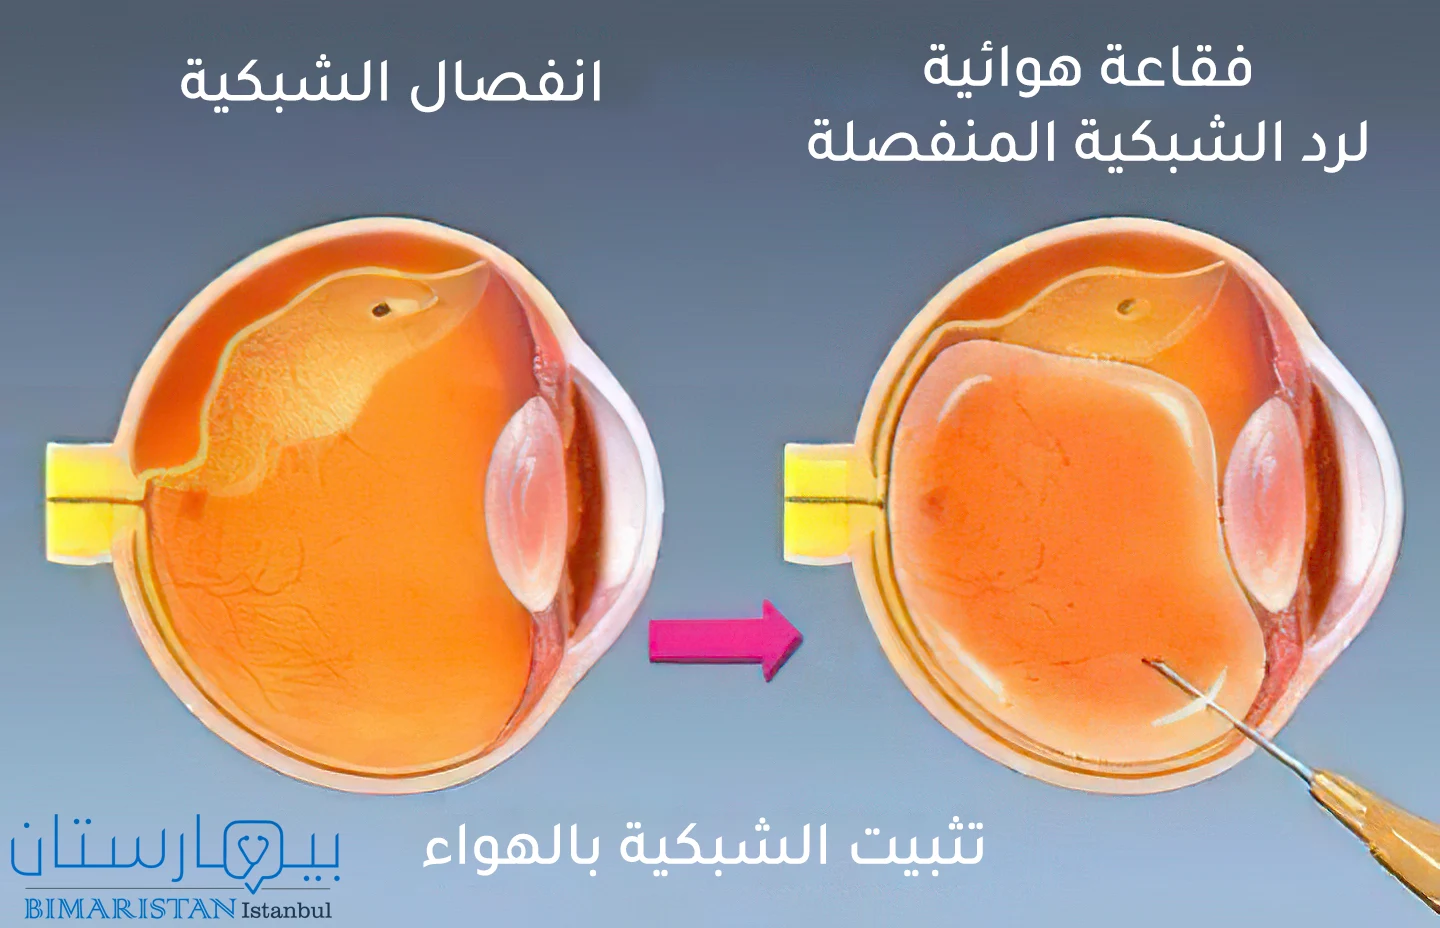 An image showing the treatment of retinal detachment by air fixation of the retina